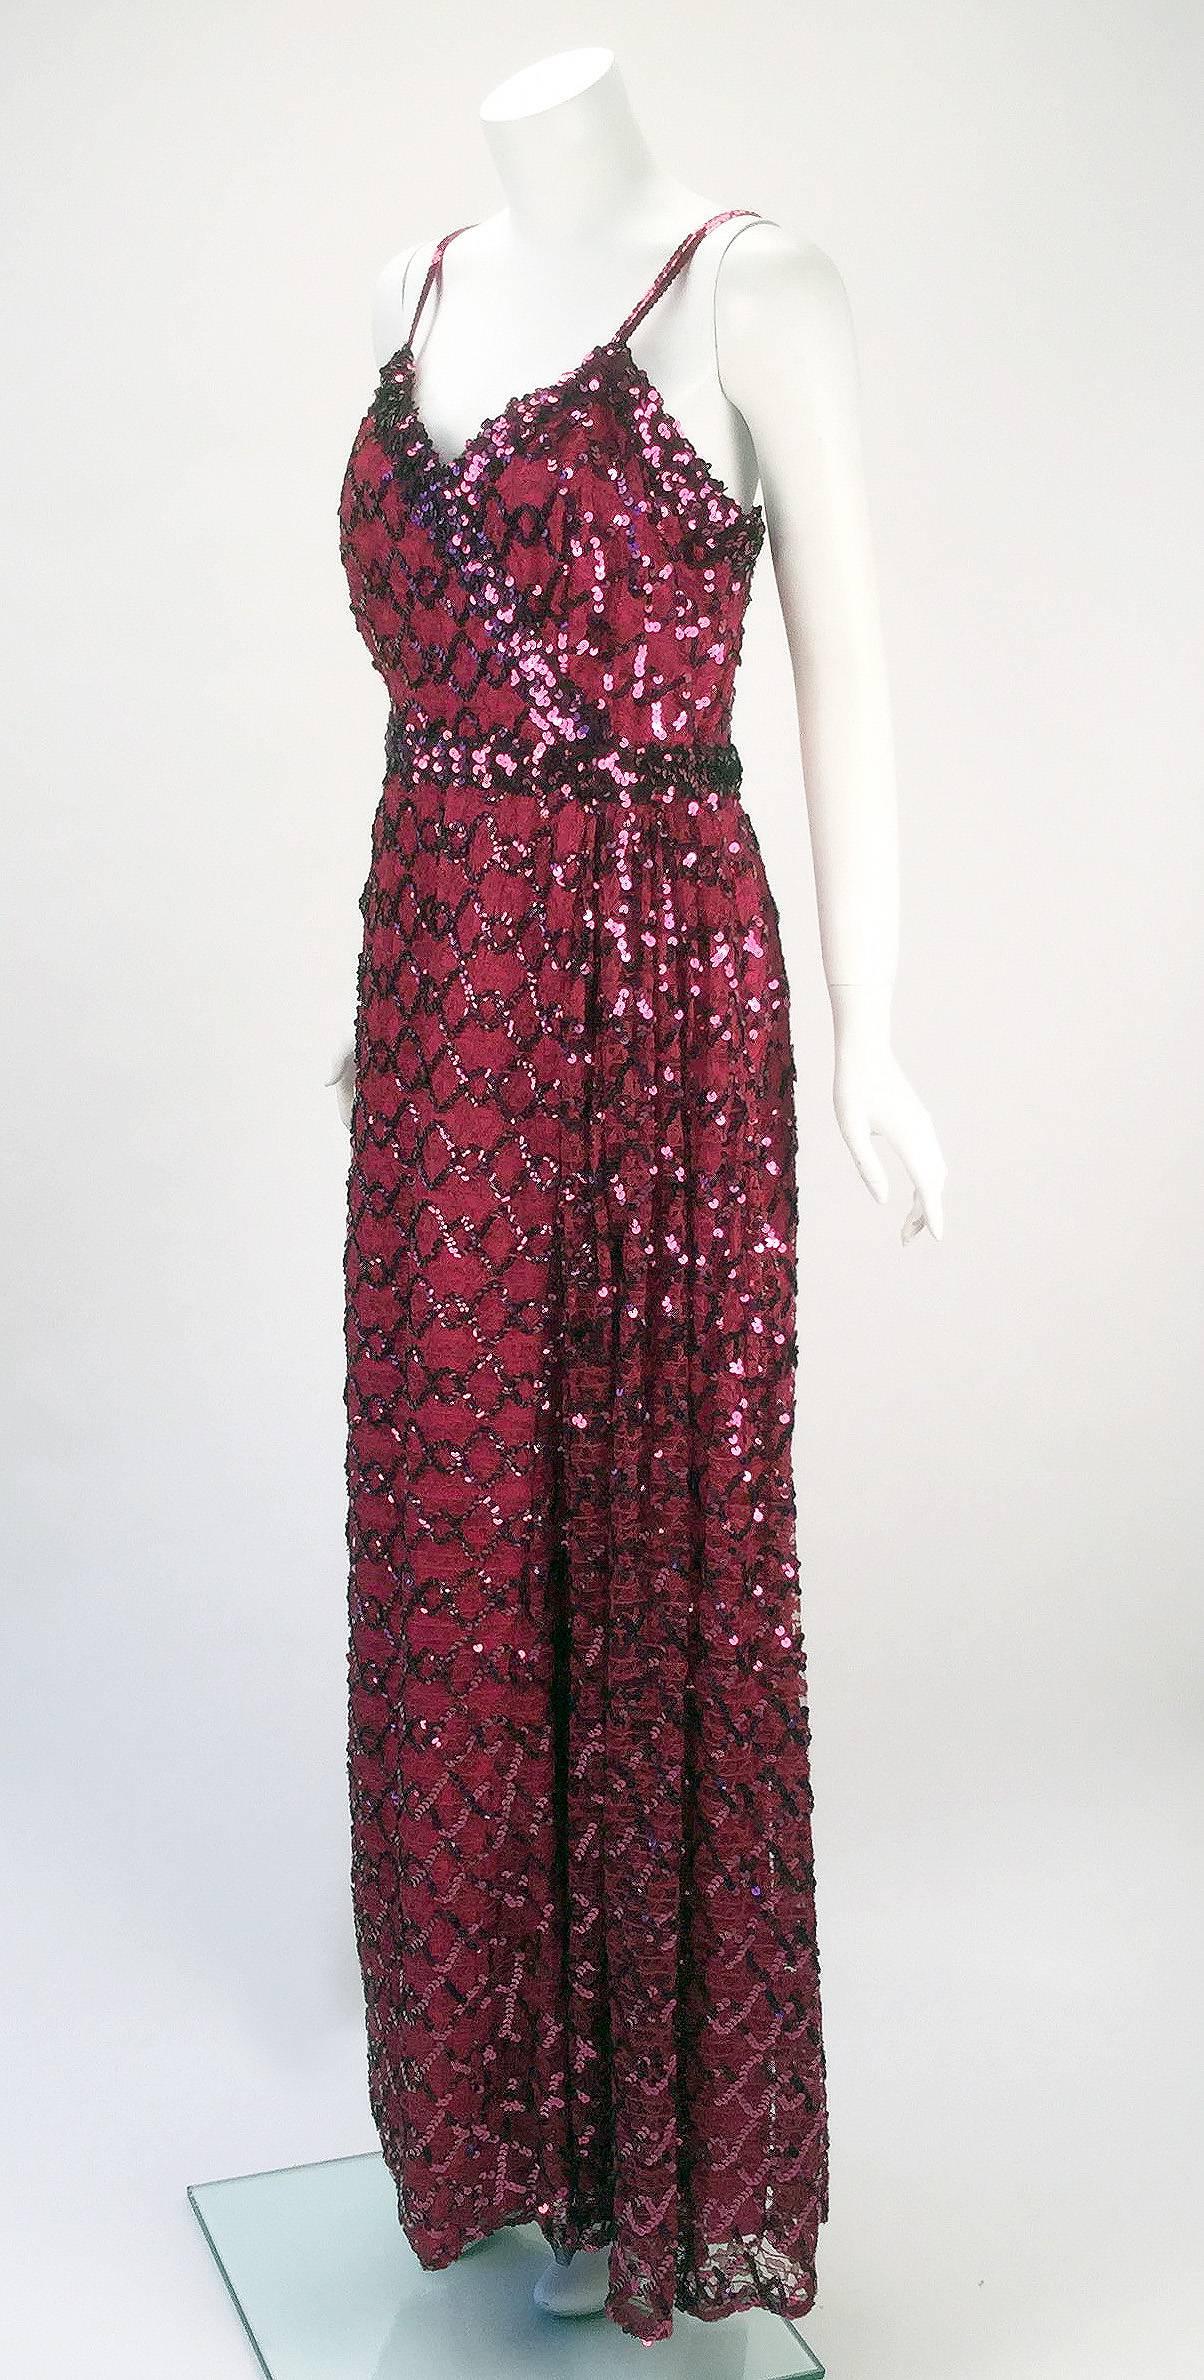 1970s Lilli Diamond maroon sequined evening gown. The sleeveless gown has a surplice-style neckline that is bordered with wide sequin trim. The lace fabric has sequins sewn in a pattern throughout. A detachable sequin belt also sits at the waist and